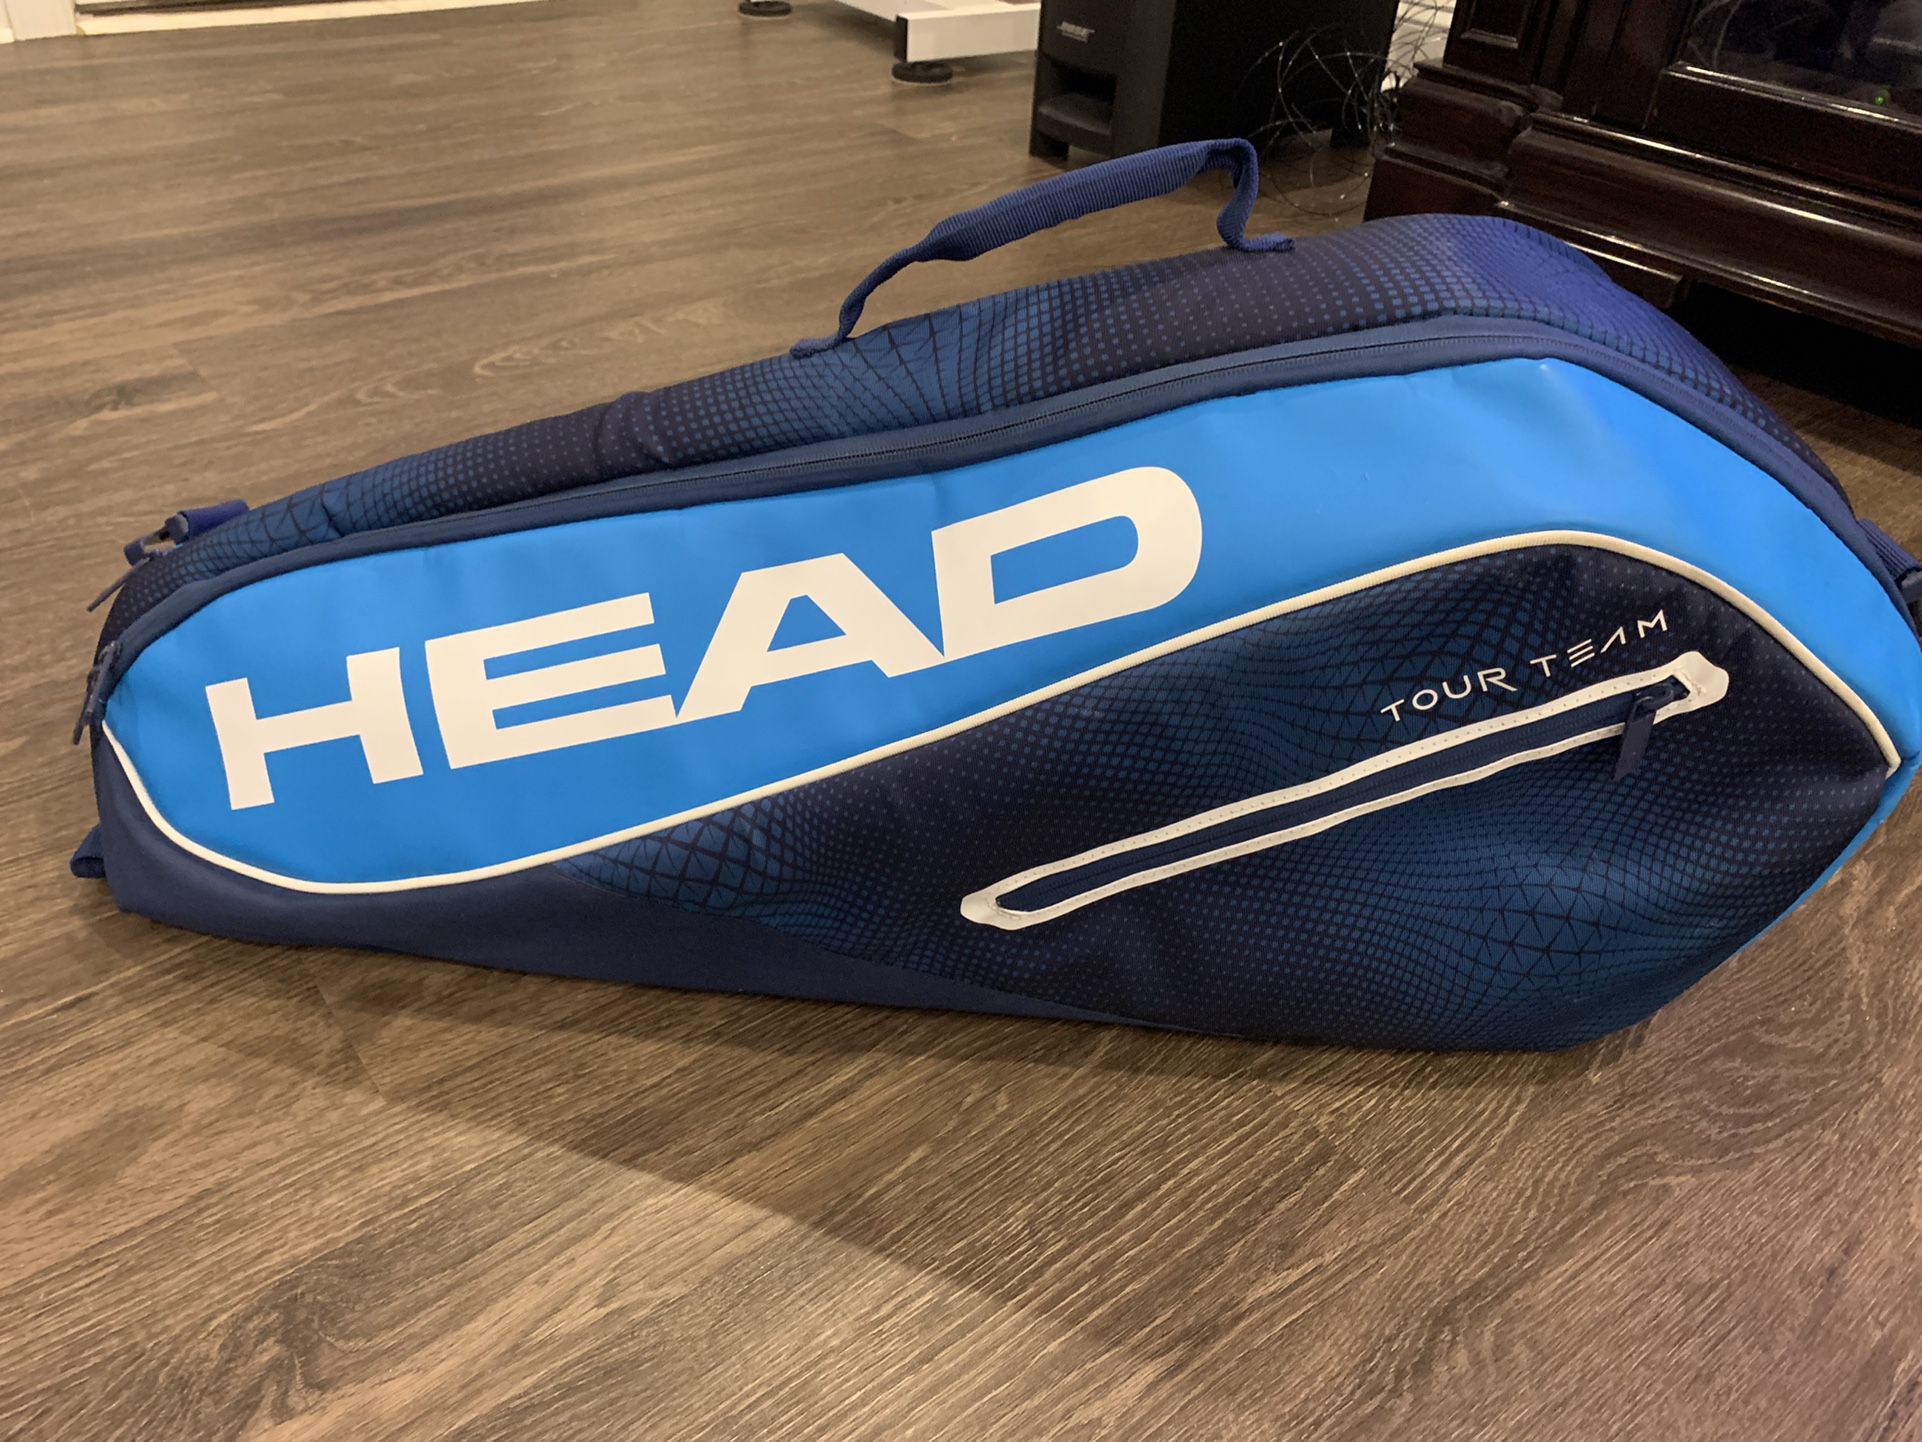 Head tennis bag, Tour team Holds 6 Racquets Insulated